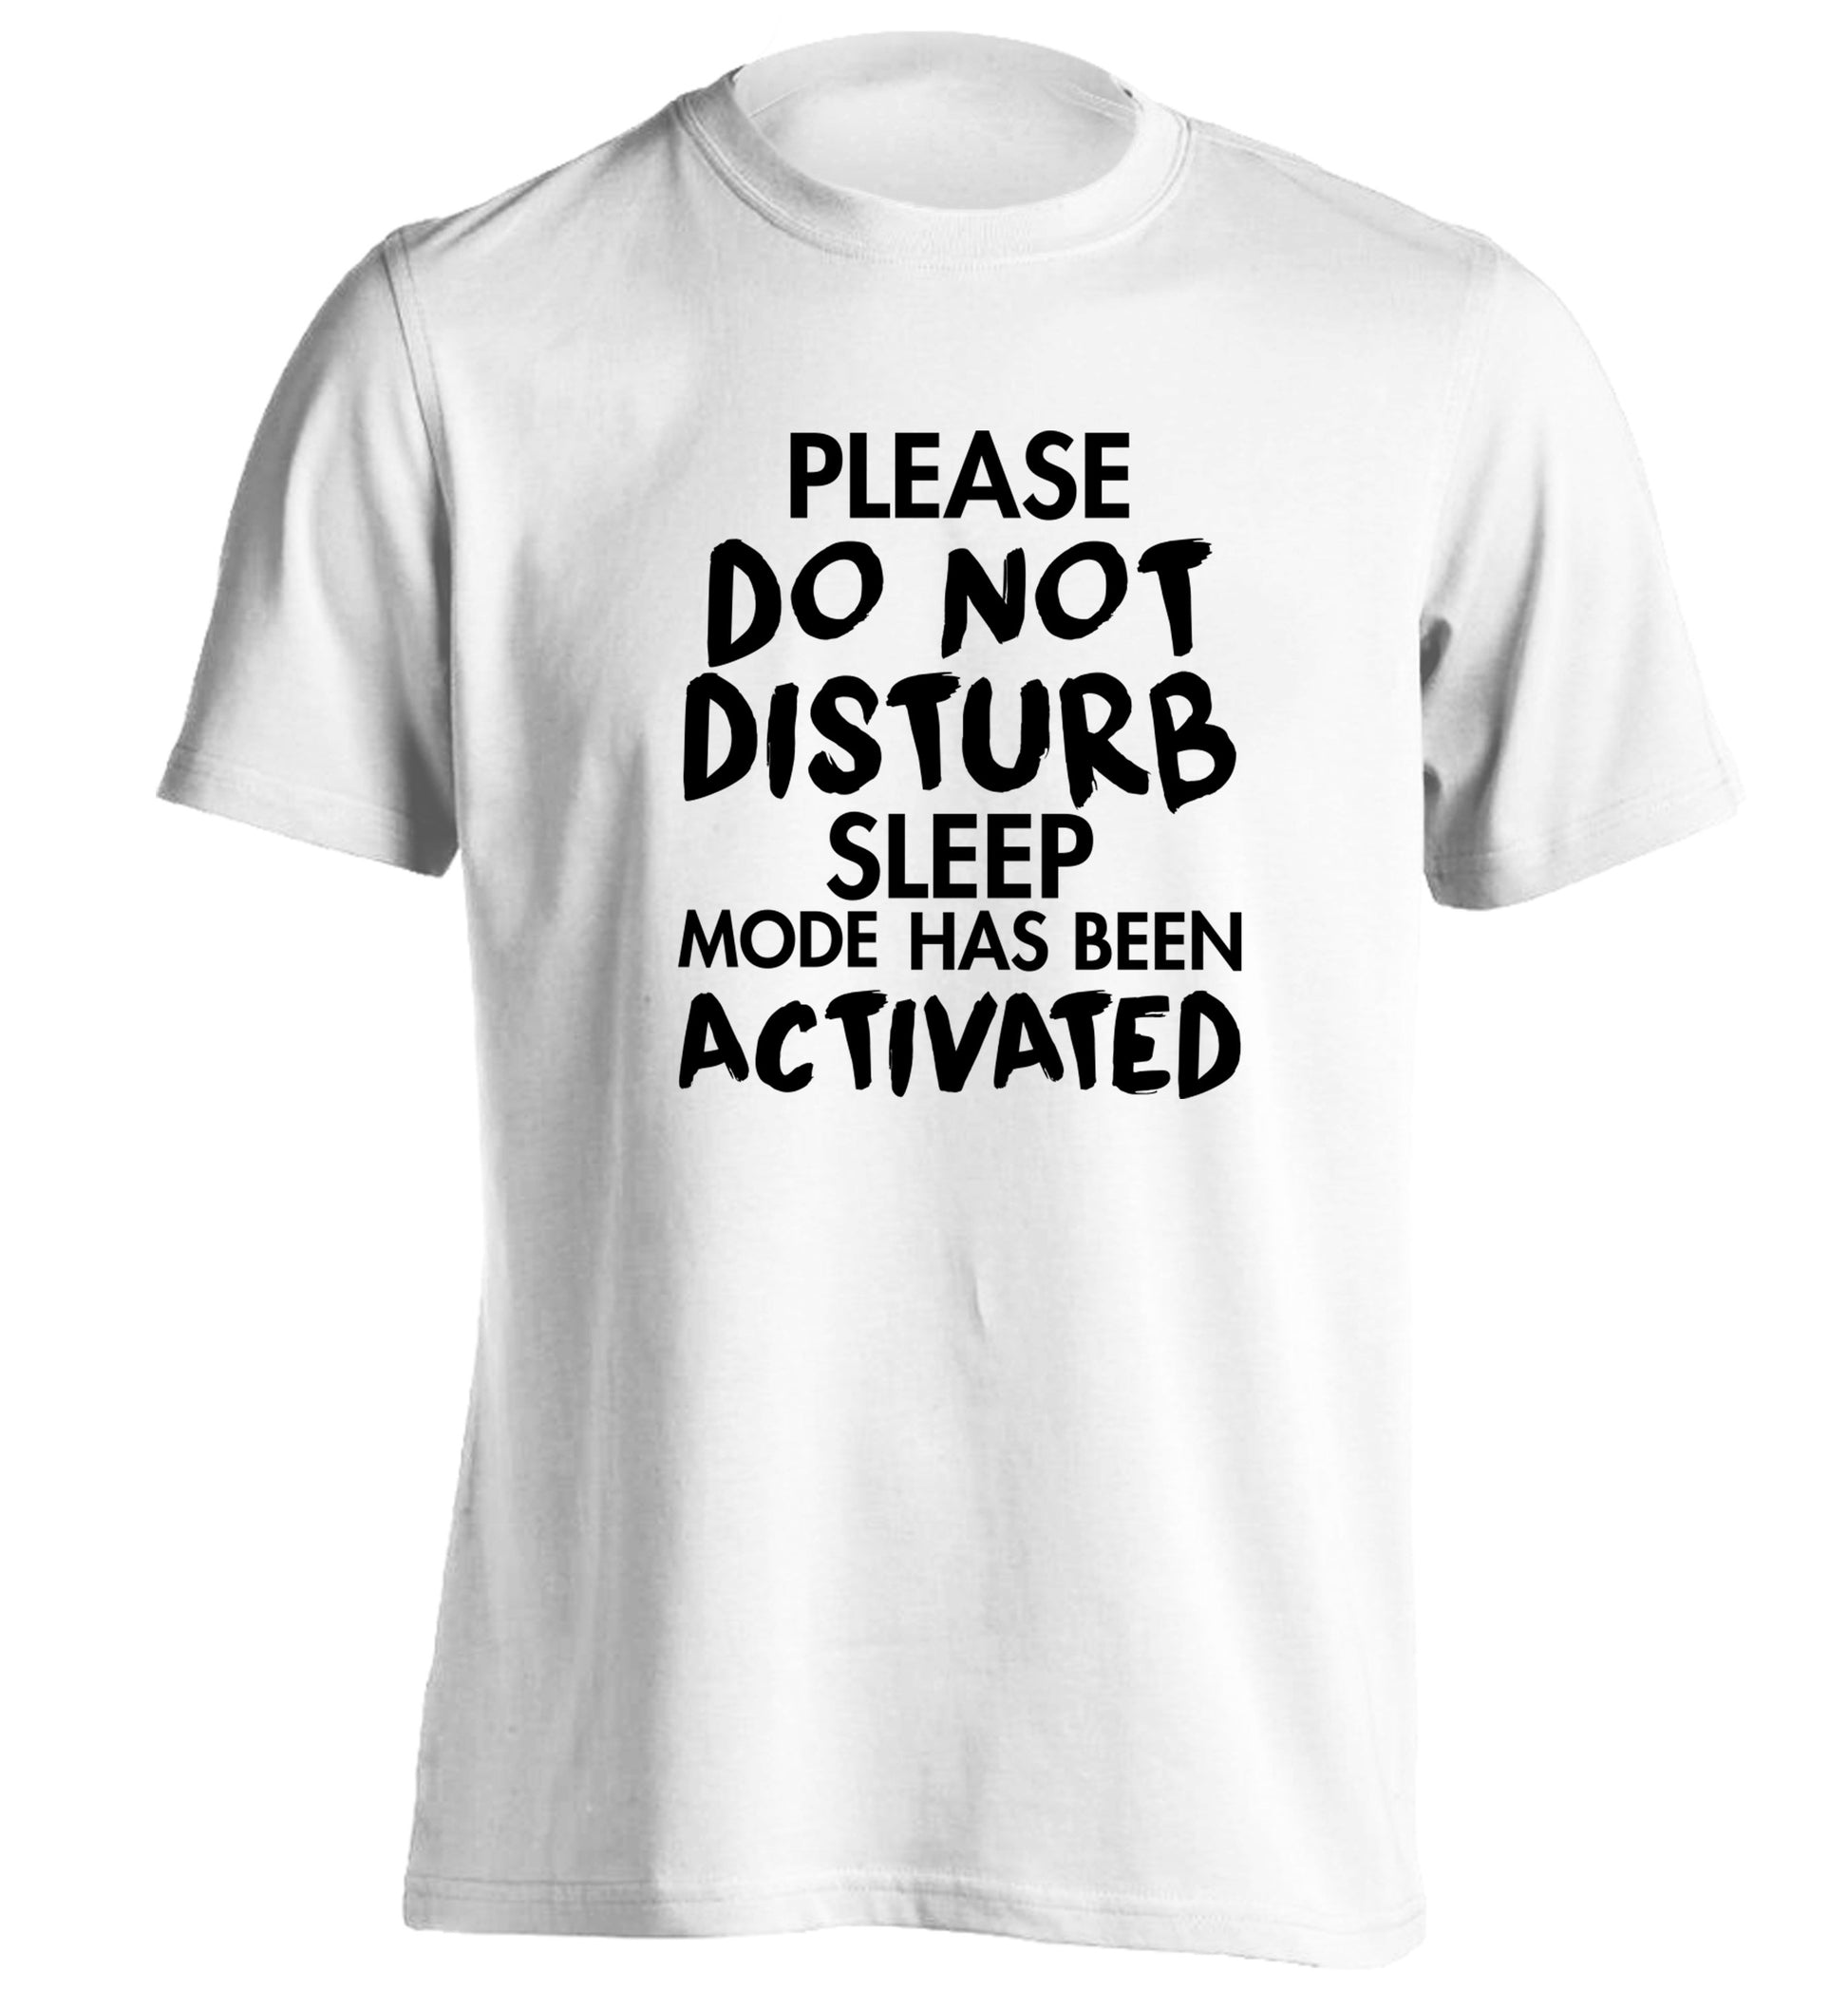 Please do not disturb sleeping mode has been activated adults unisex white Tshirt 2XL